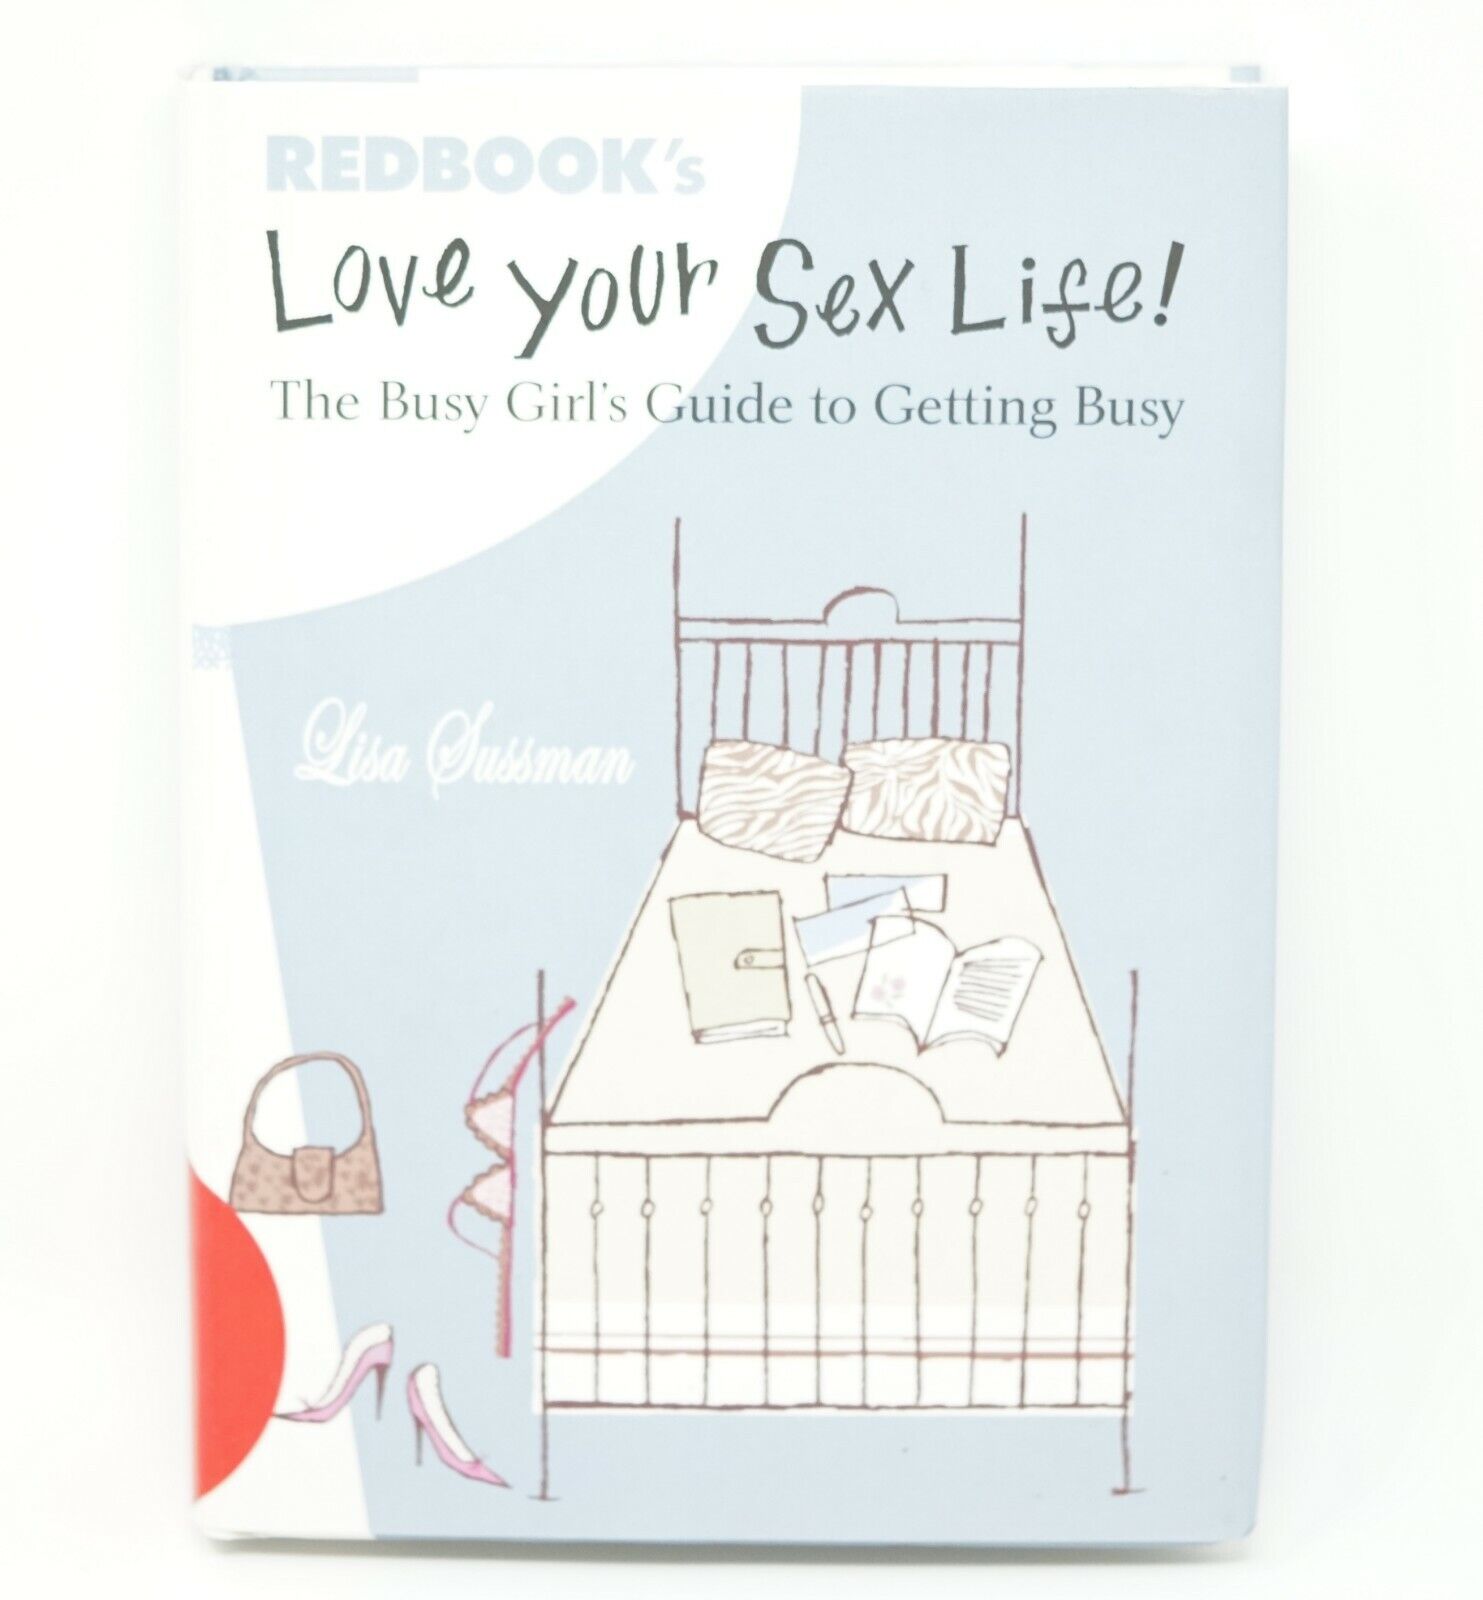 Love Your Sex Life! The Busy Girland#039;s Guide to Getting Busy by Lisa Sussman..